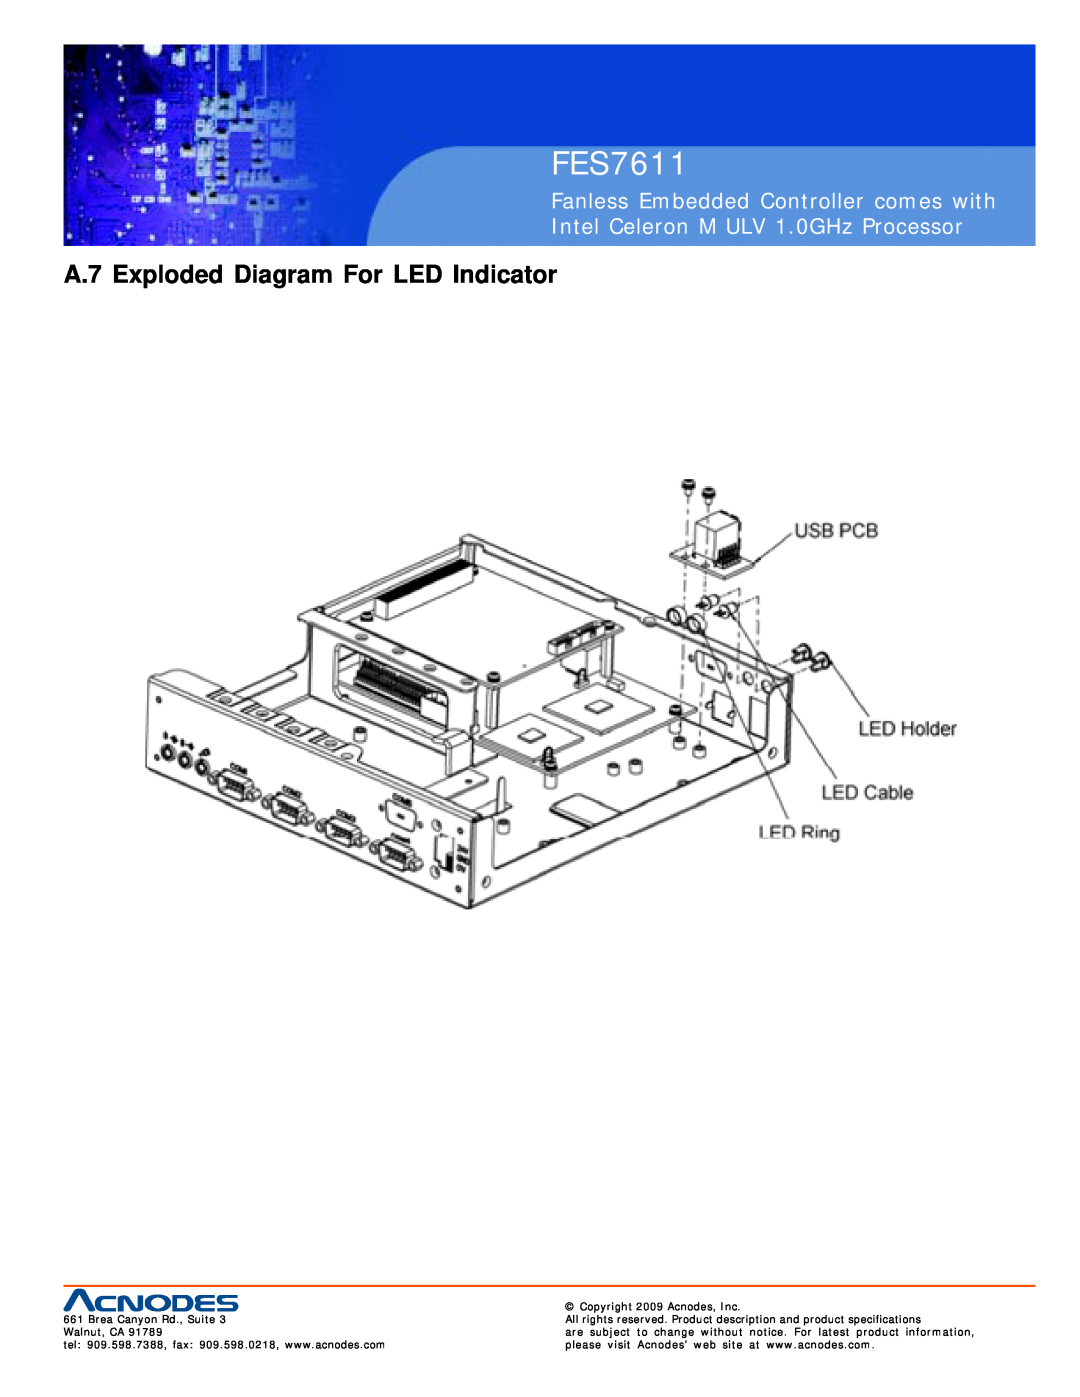 Acnodes FES7611 A.7 Exploded Diagram For LED Indicator, Fanless Embedded Controller comes with, Brea Canyon Rd., Suite 